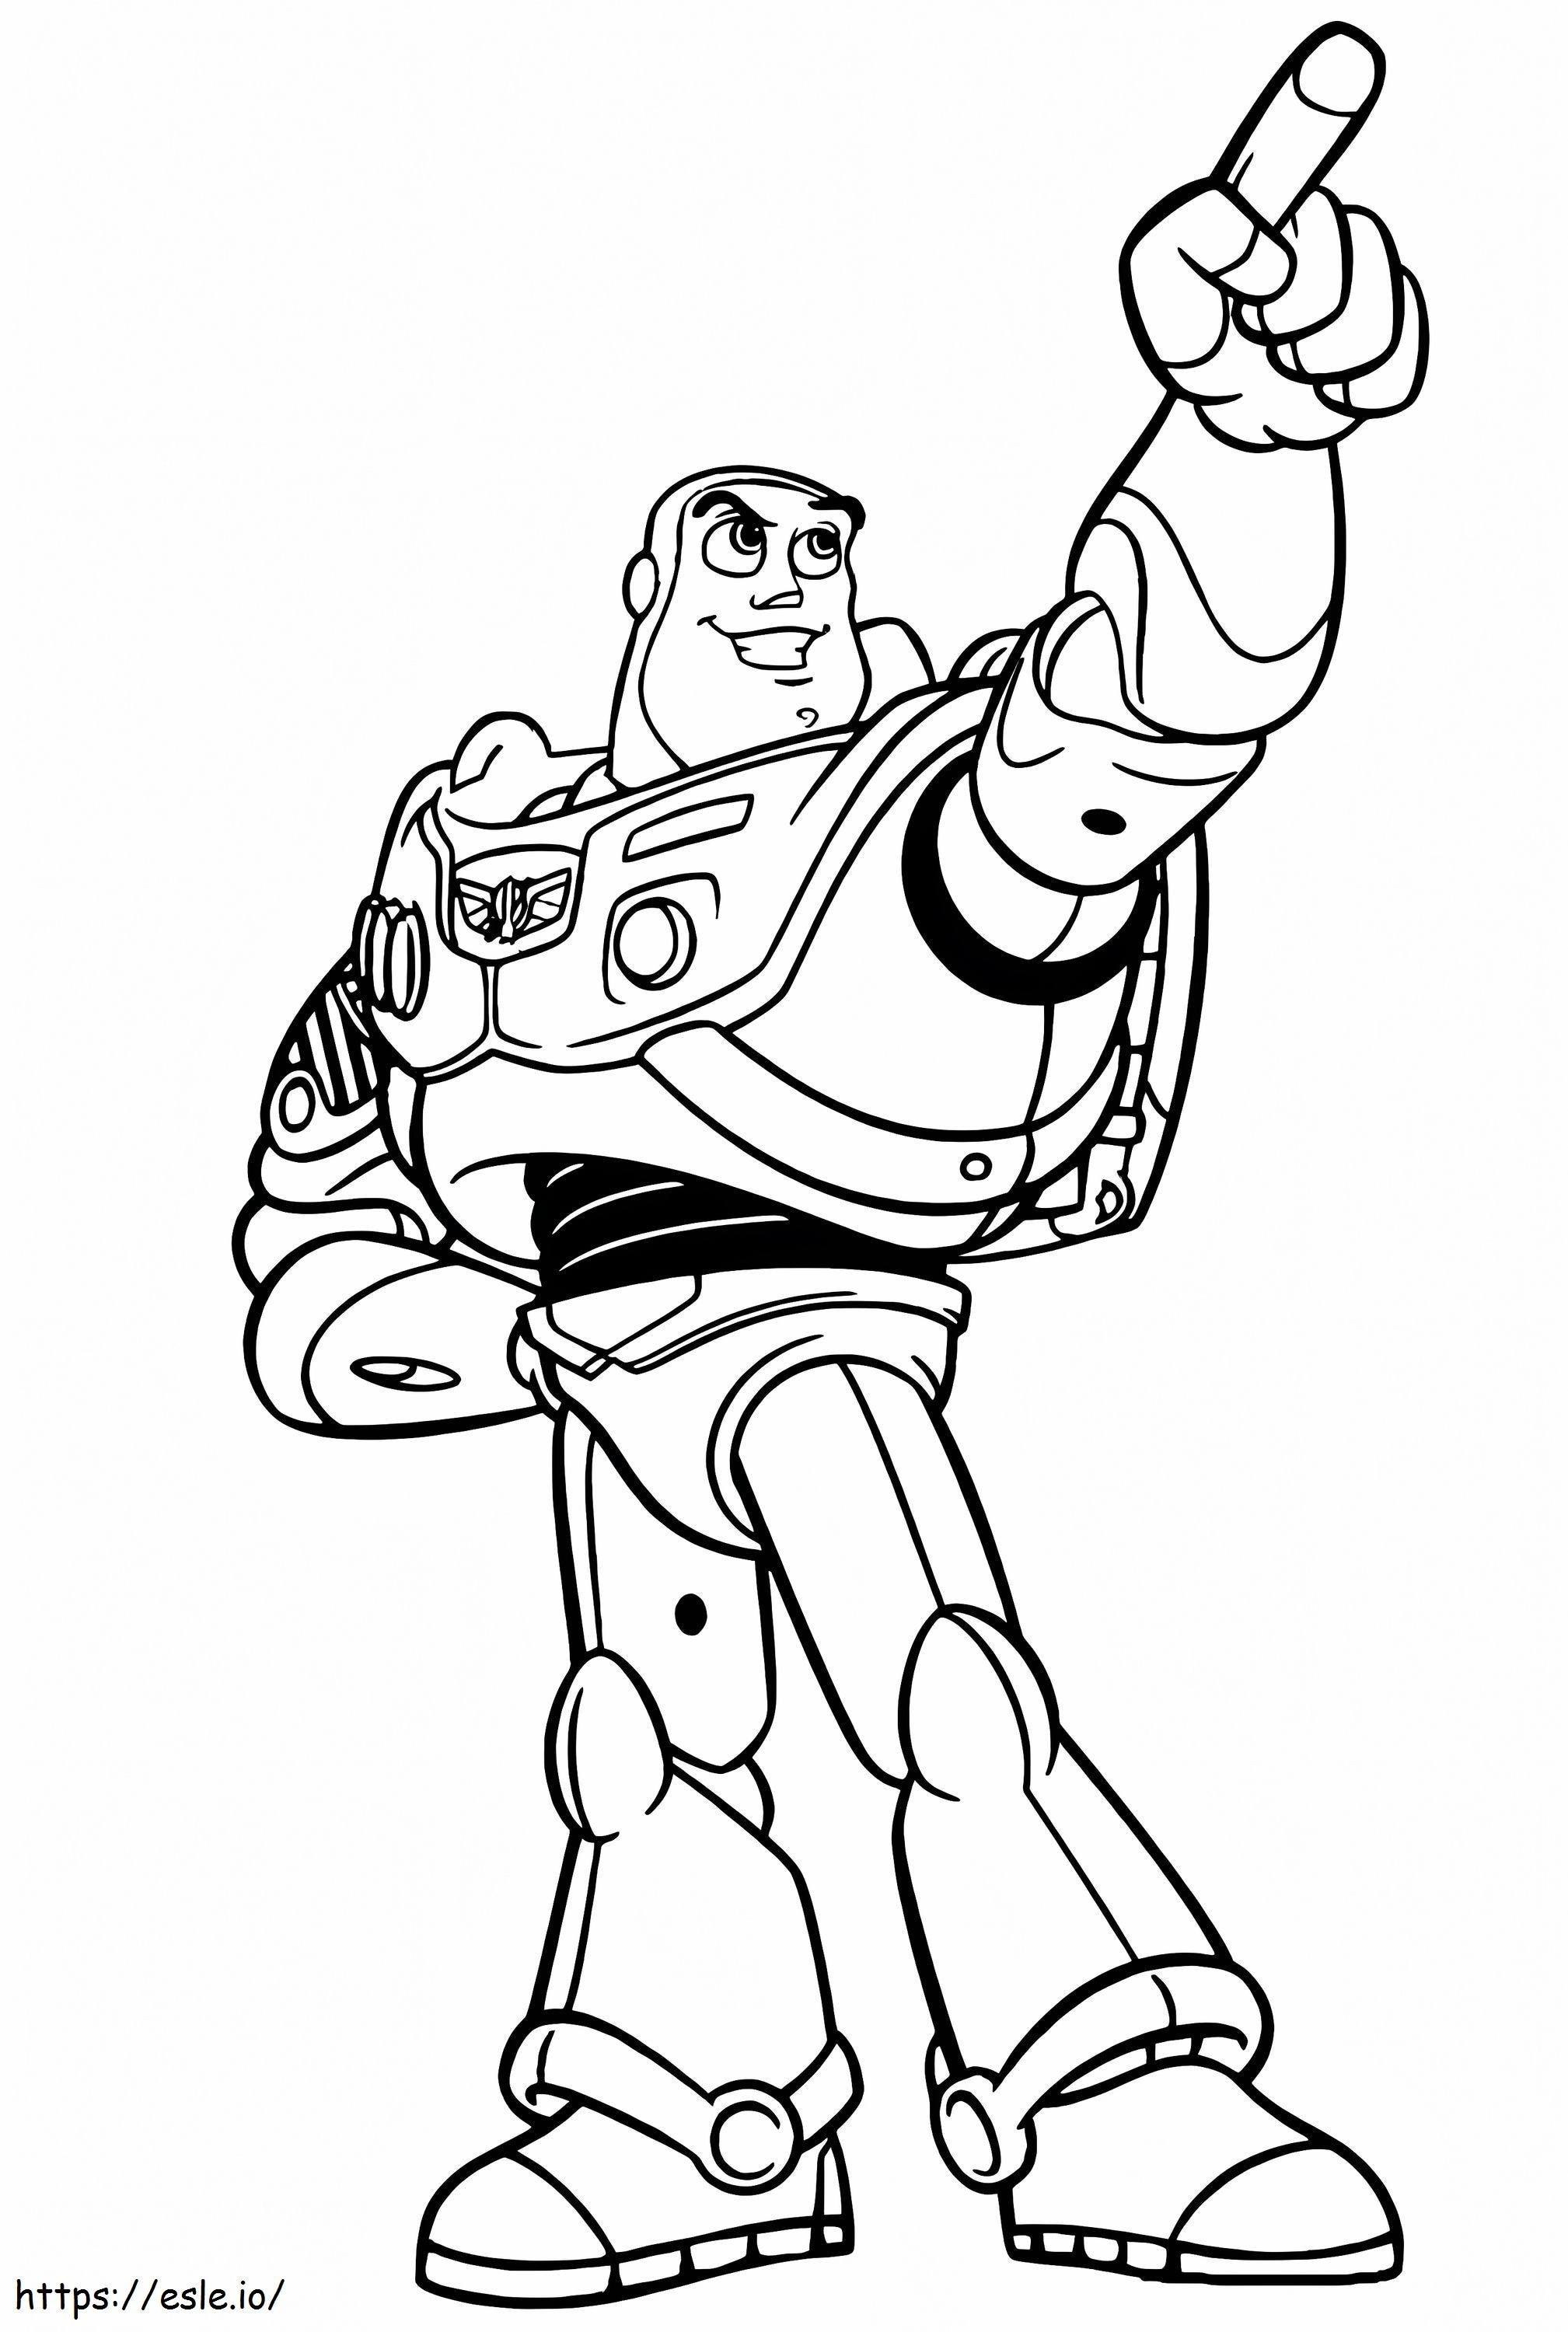 Buzz Lightyear Pointing Hand coloring page